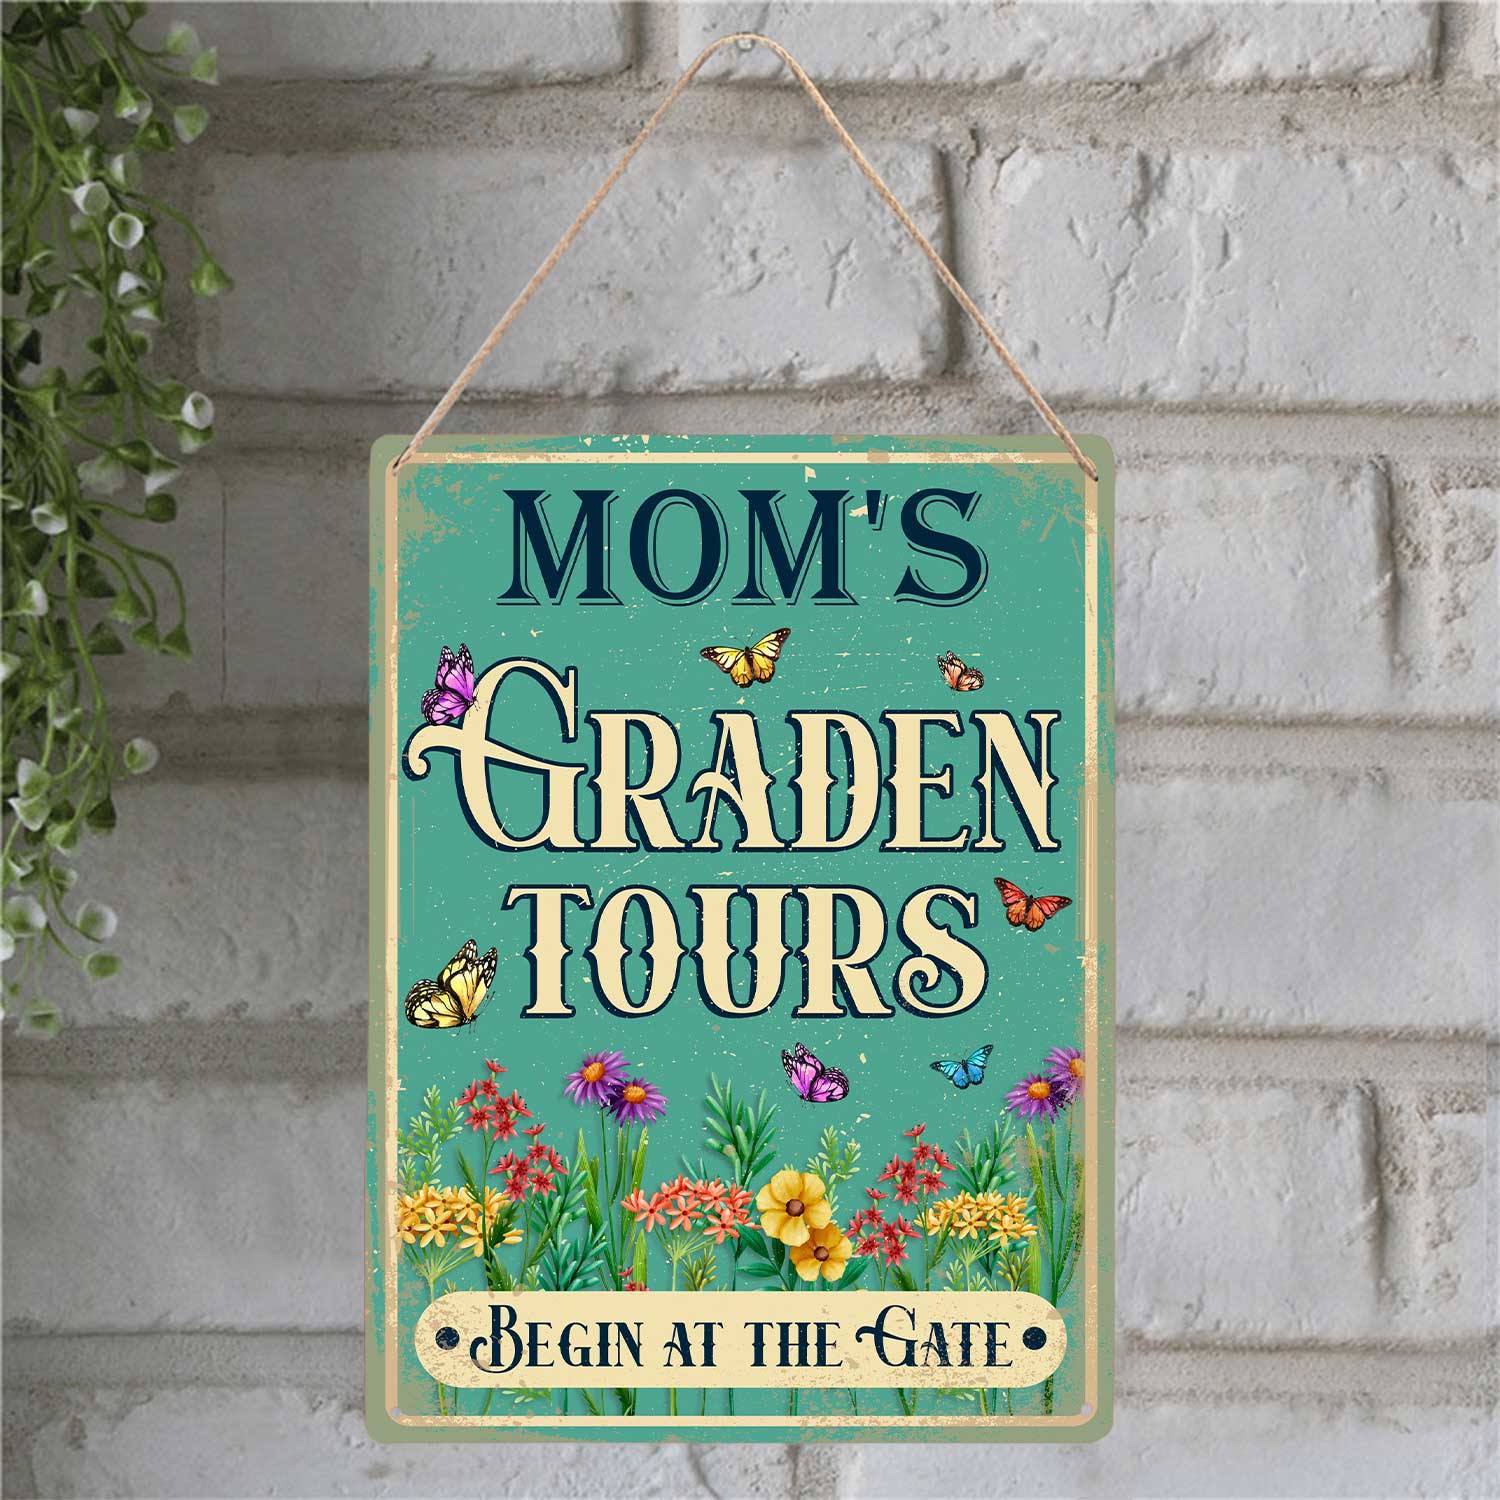 This garden metal sign is designed with colorful flowers and butterflies. If your girlfriend's mom is a nature lover, this sign is a perfect gift for her.